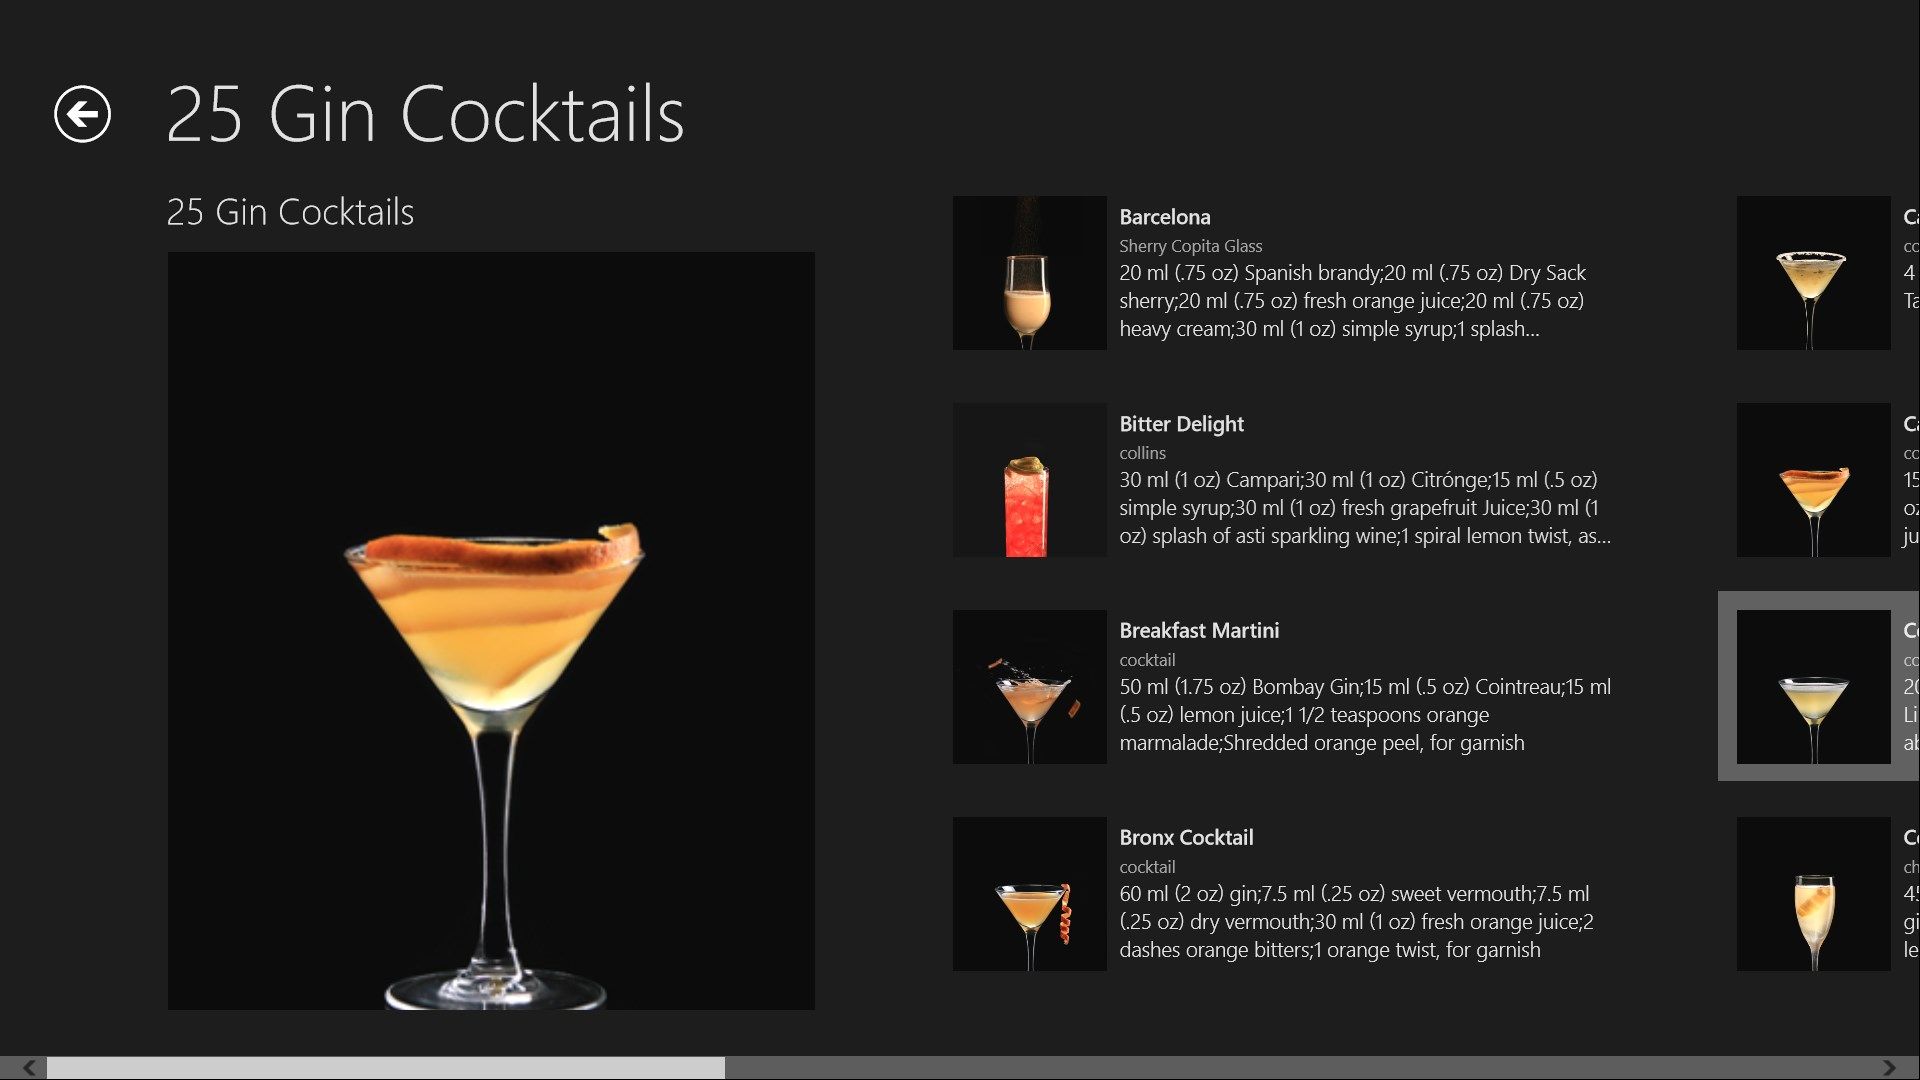 Show all the cocktails as a group with brief description